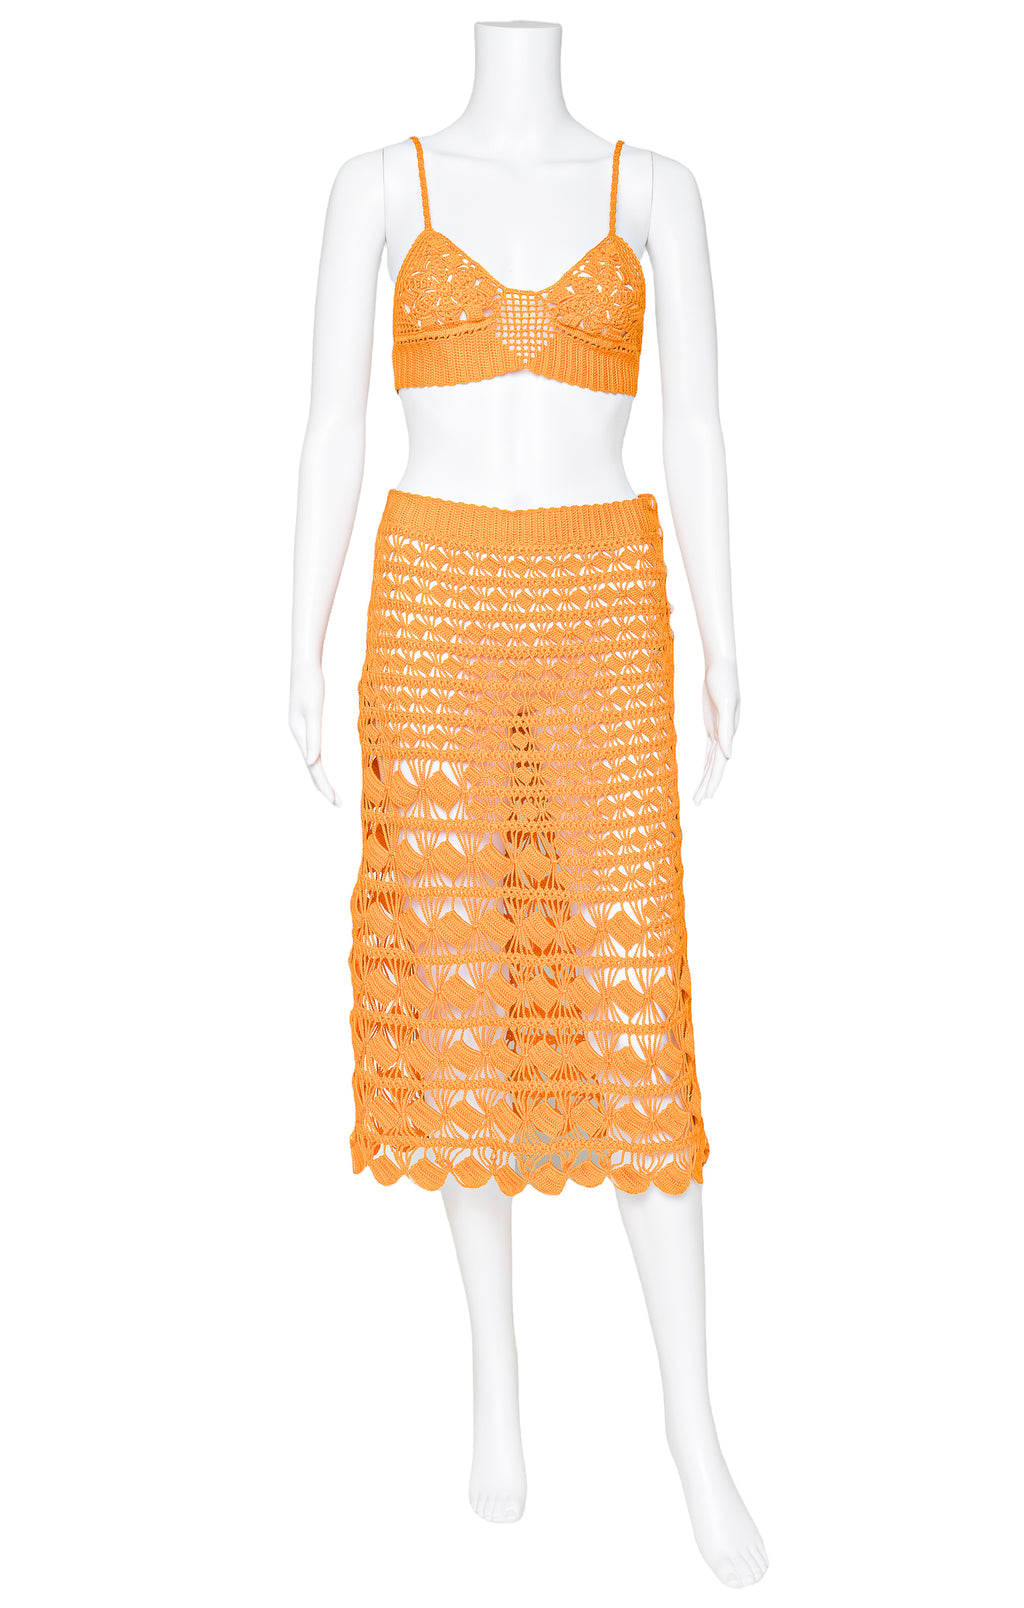 ACNE STUDIOS with tags Set Size: Top - S, Skirt - M